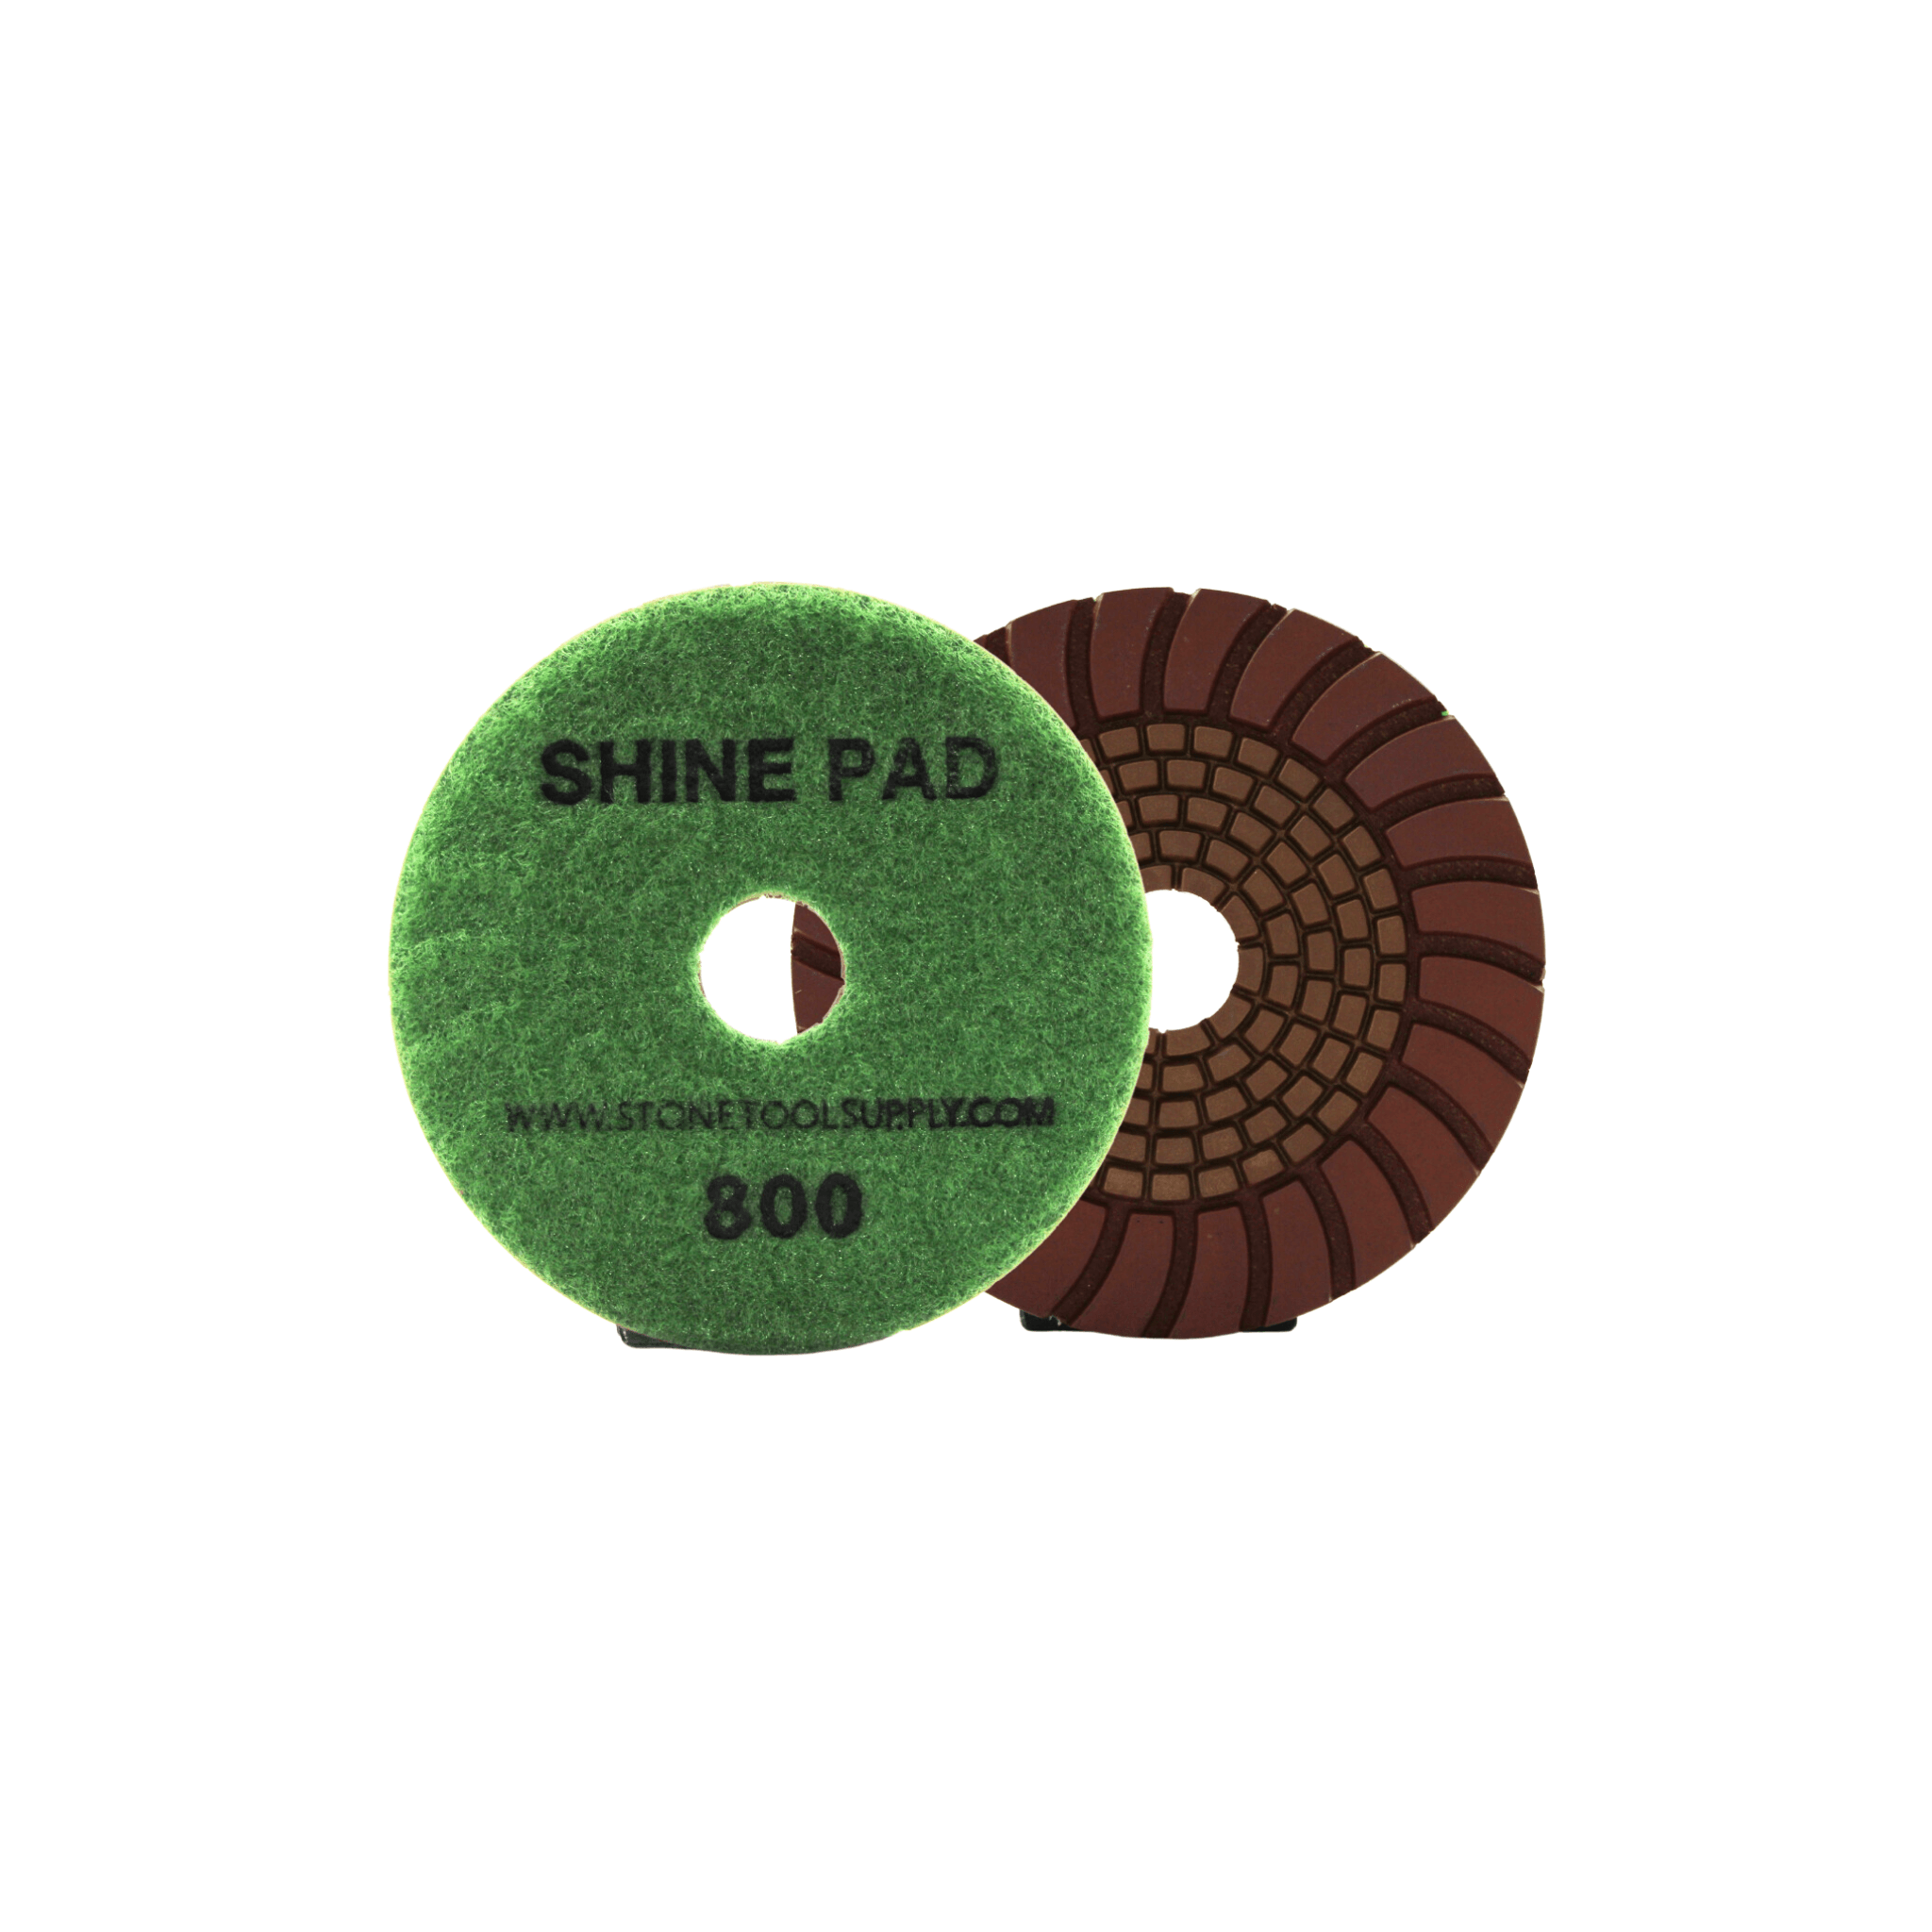 Copper and Resin Bonded 'Shine' Pad 4" #800 - Direct Stone Tool Supply, Inc